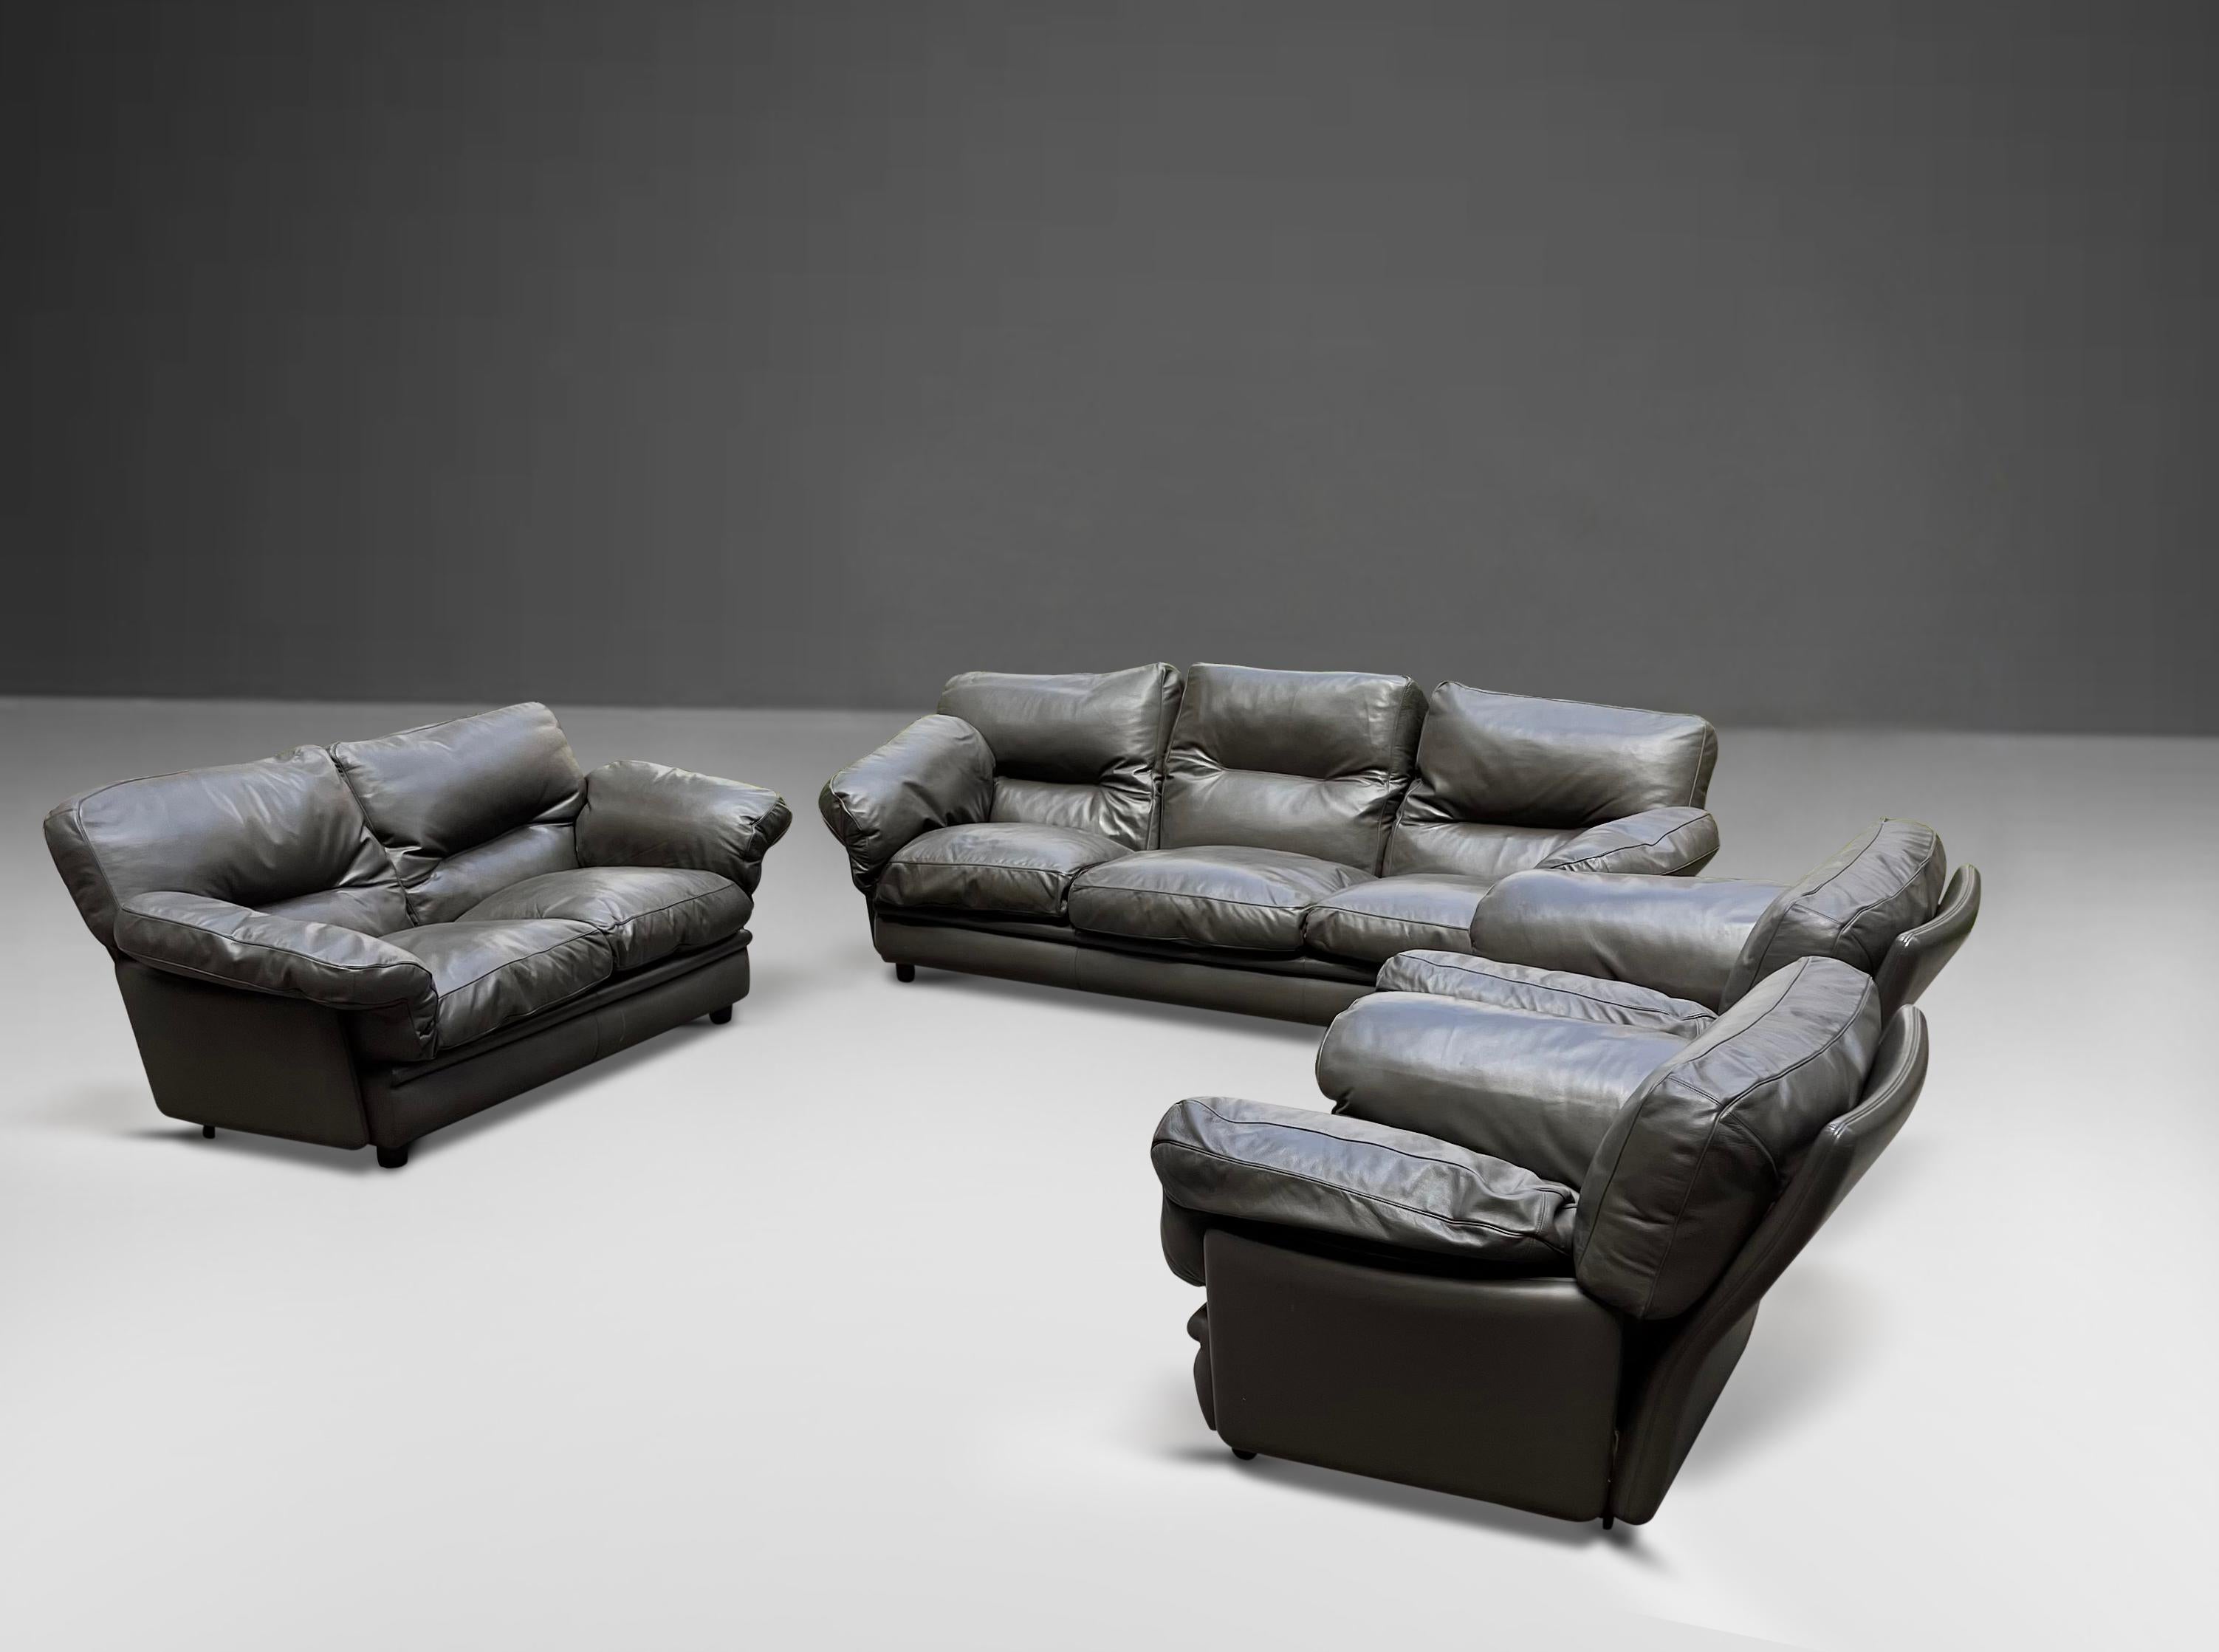 Italian Mid-Century Modern Living Room Set by Paltrona Frau Gray Leather, Italy, 1970s For Sale